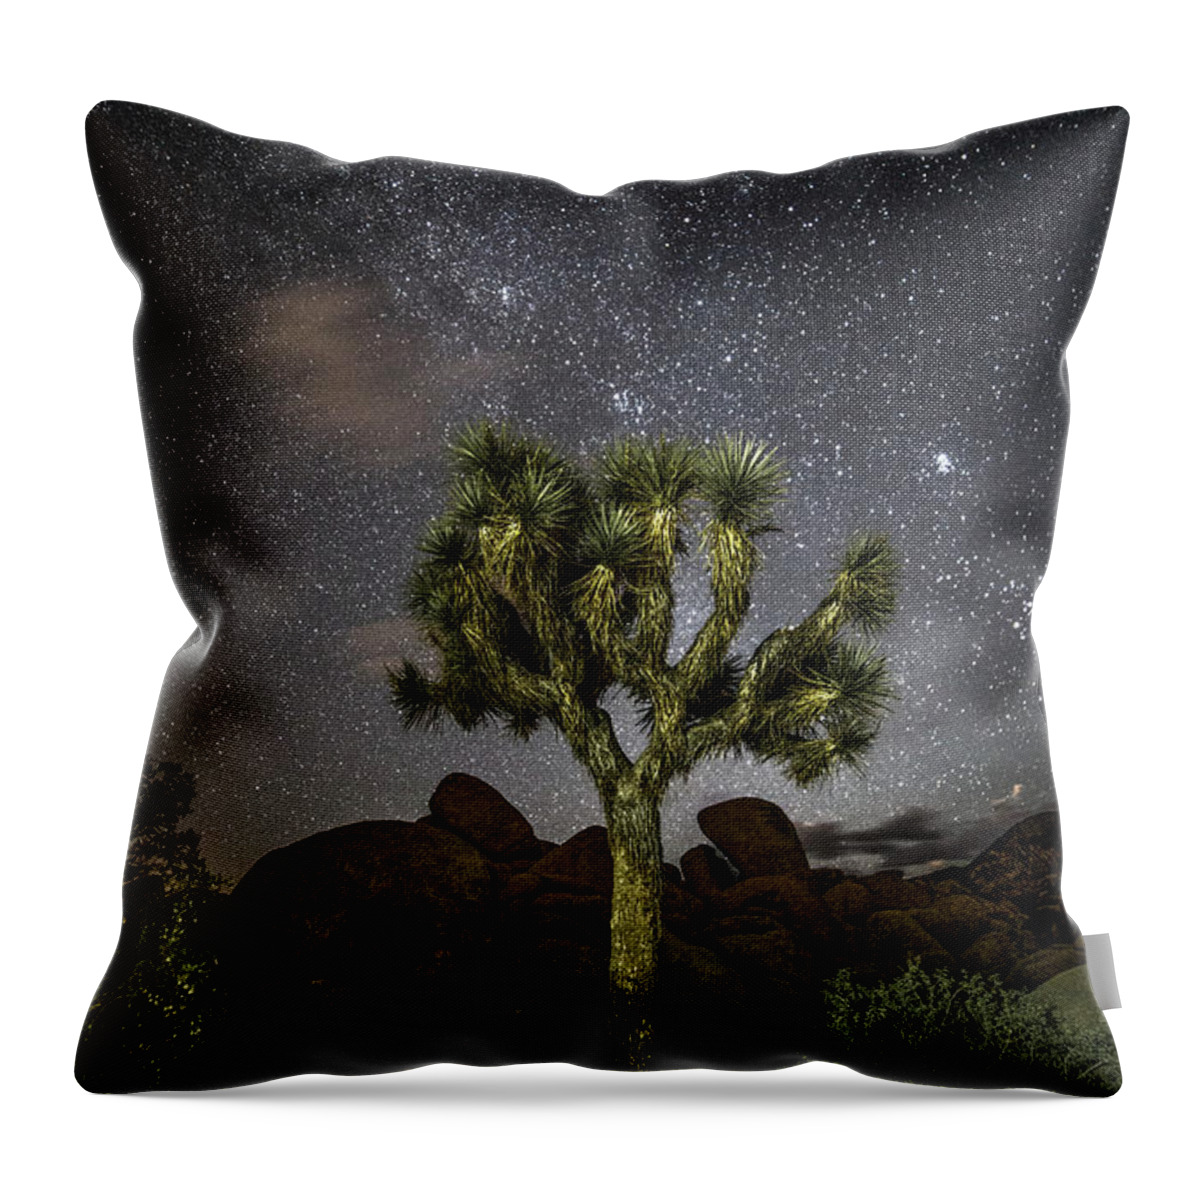 Astrophotography Throw Pillow featuring the photograph Illuminati 09 by Ryan Weddle